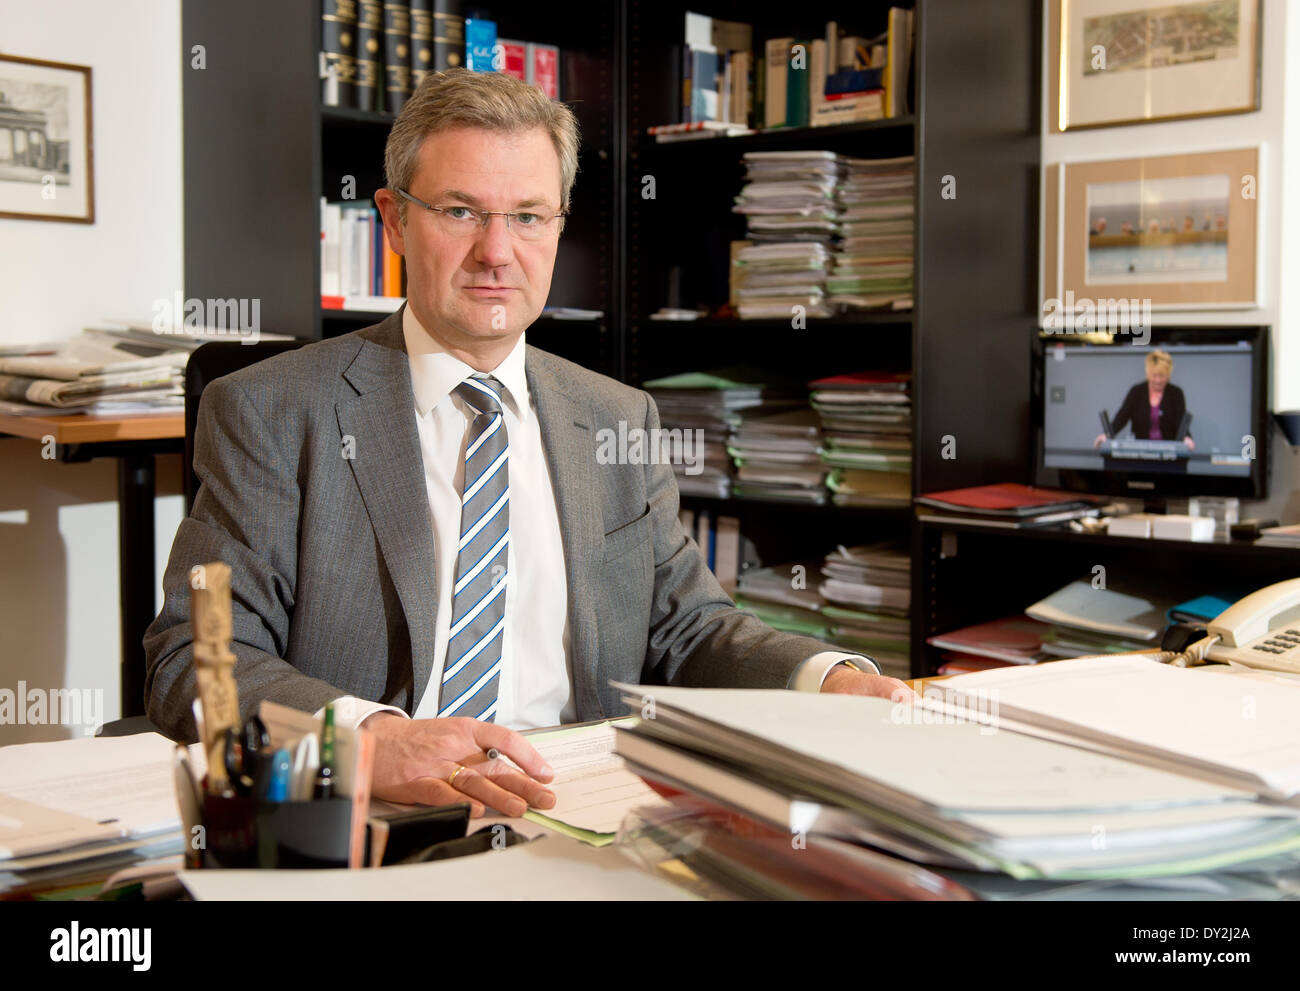 Kay Scheller, the long-standing director of the CDU/CSU parliamentary group, sits in his office in the German Bundestag in Berlin, Germany, 04 April 2014. Scheller will become the new president of the Federal Audit Office (BRH). Photo: Tim Brakemeier/dpa Stock Photo